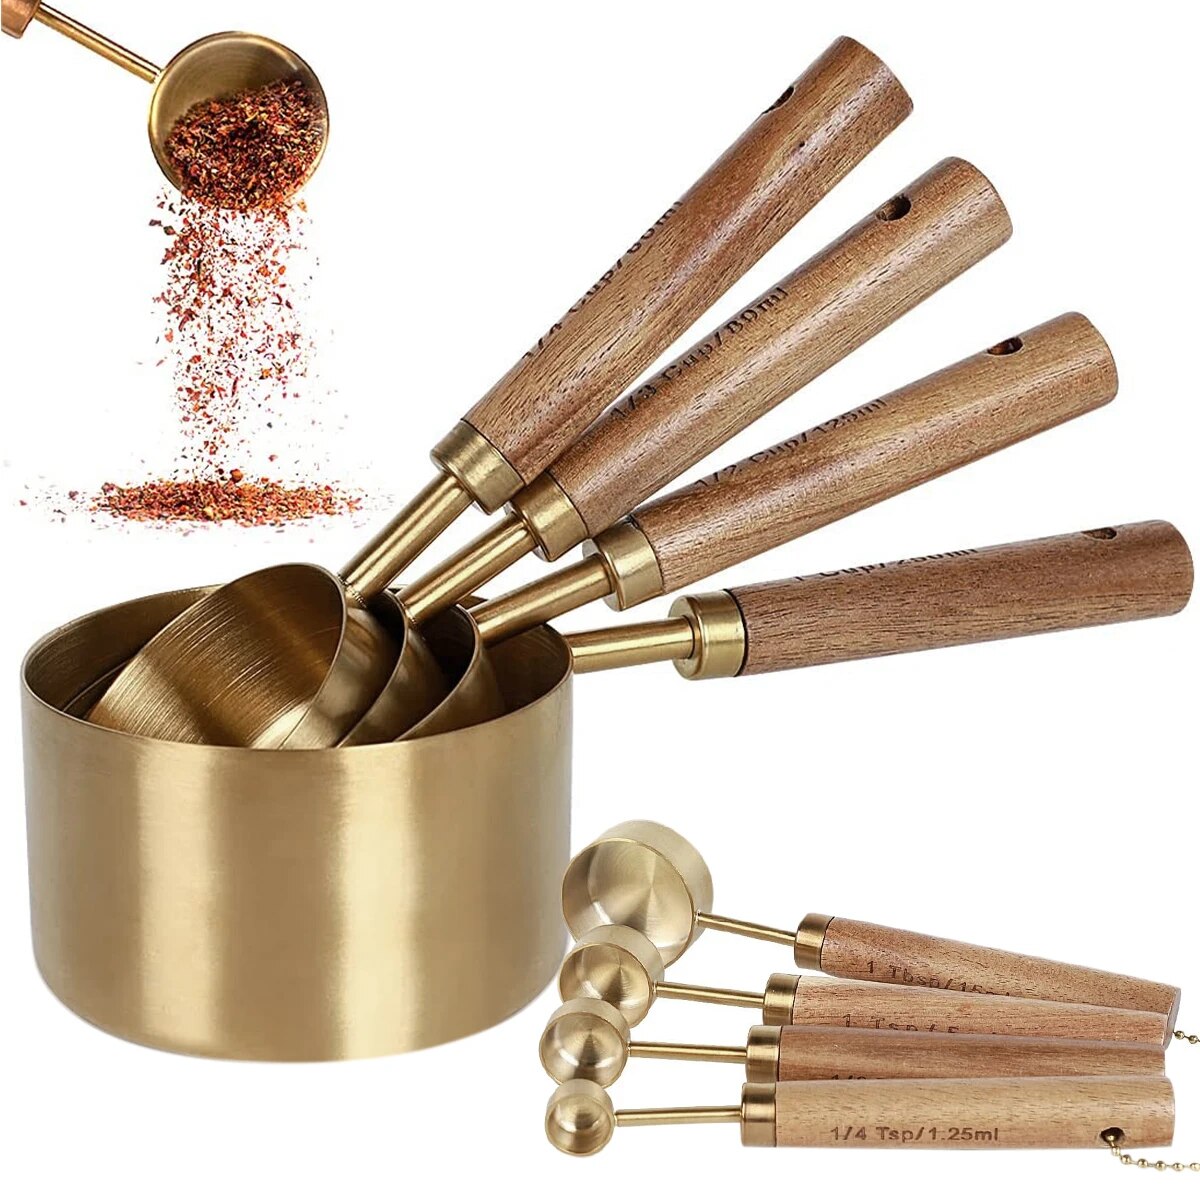 Gold Stainless Steele Measuring Cups and Spoon Set